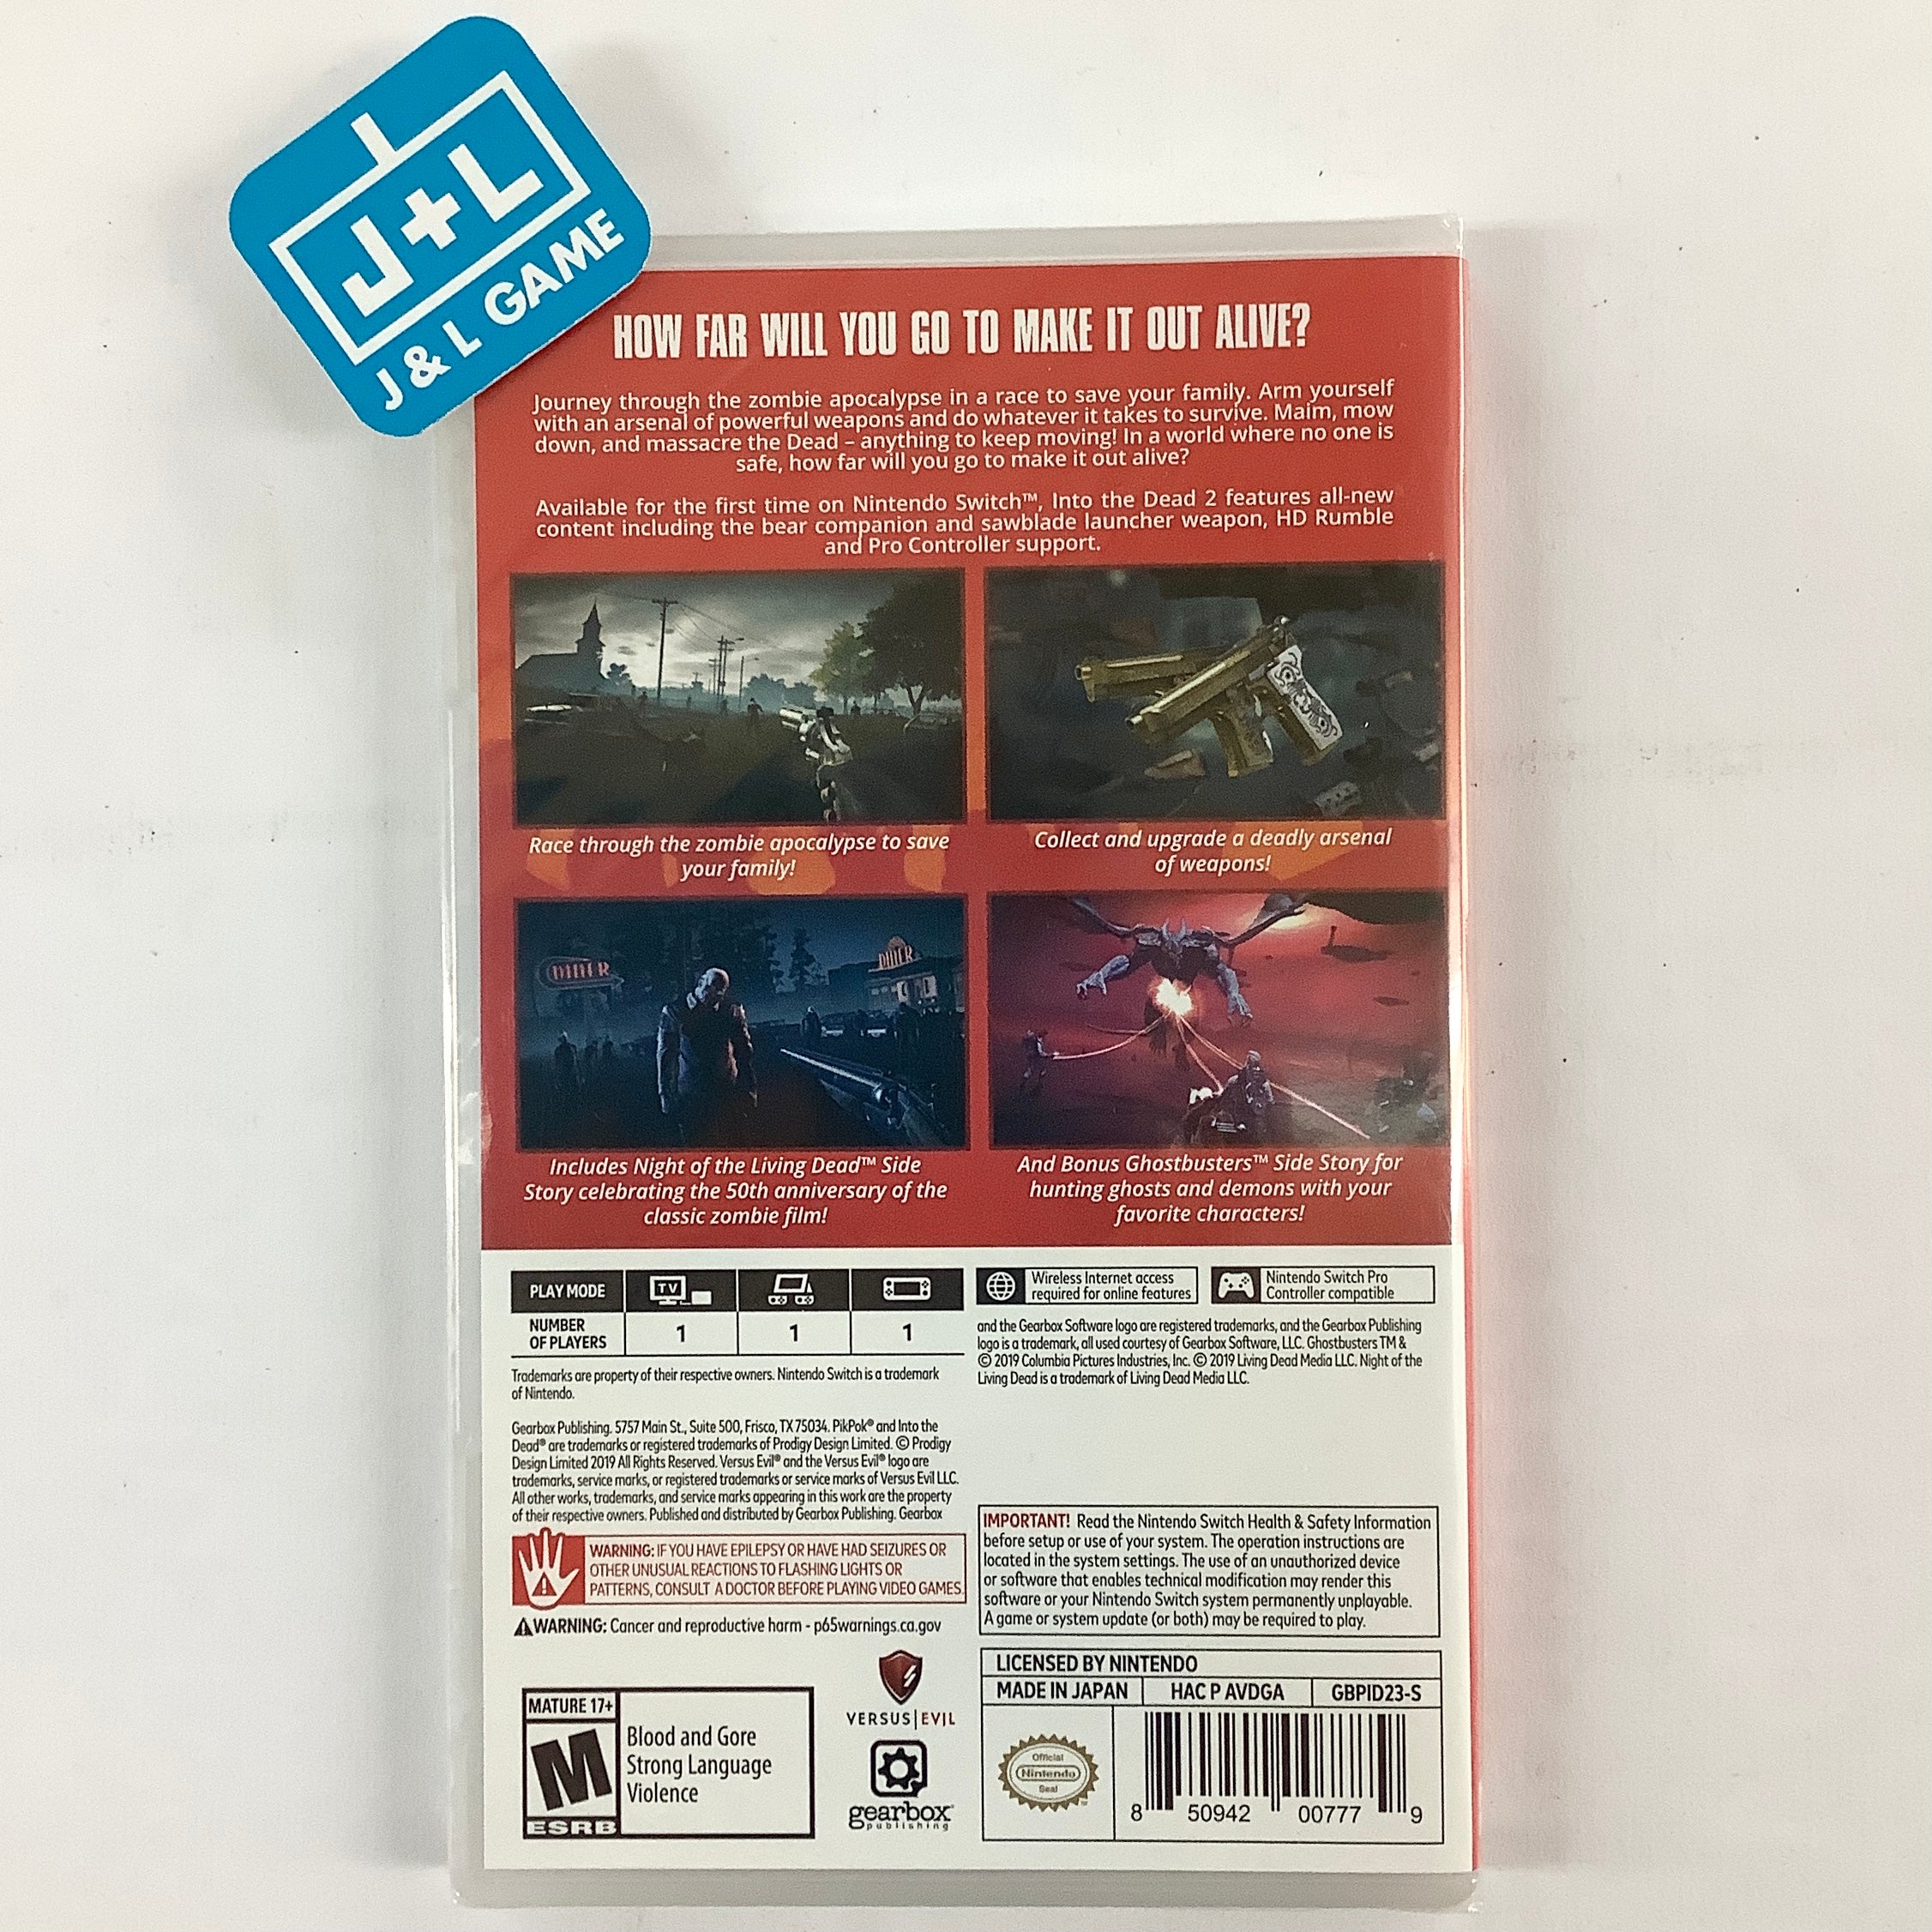 Into the Dead 2 - (NSW) Nintendo Switch Video Games Gearbox Publishing   